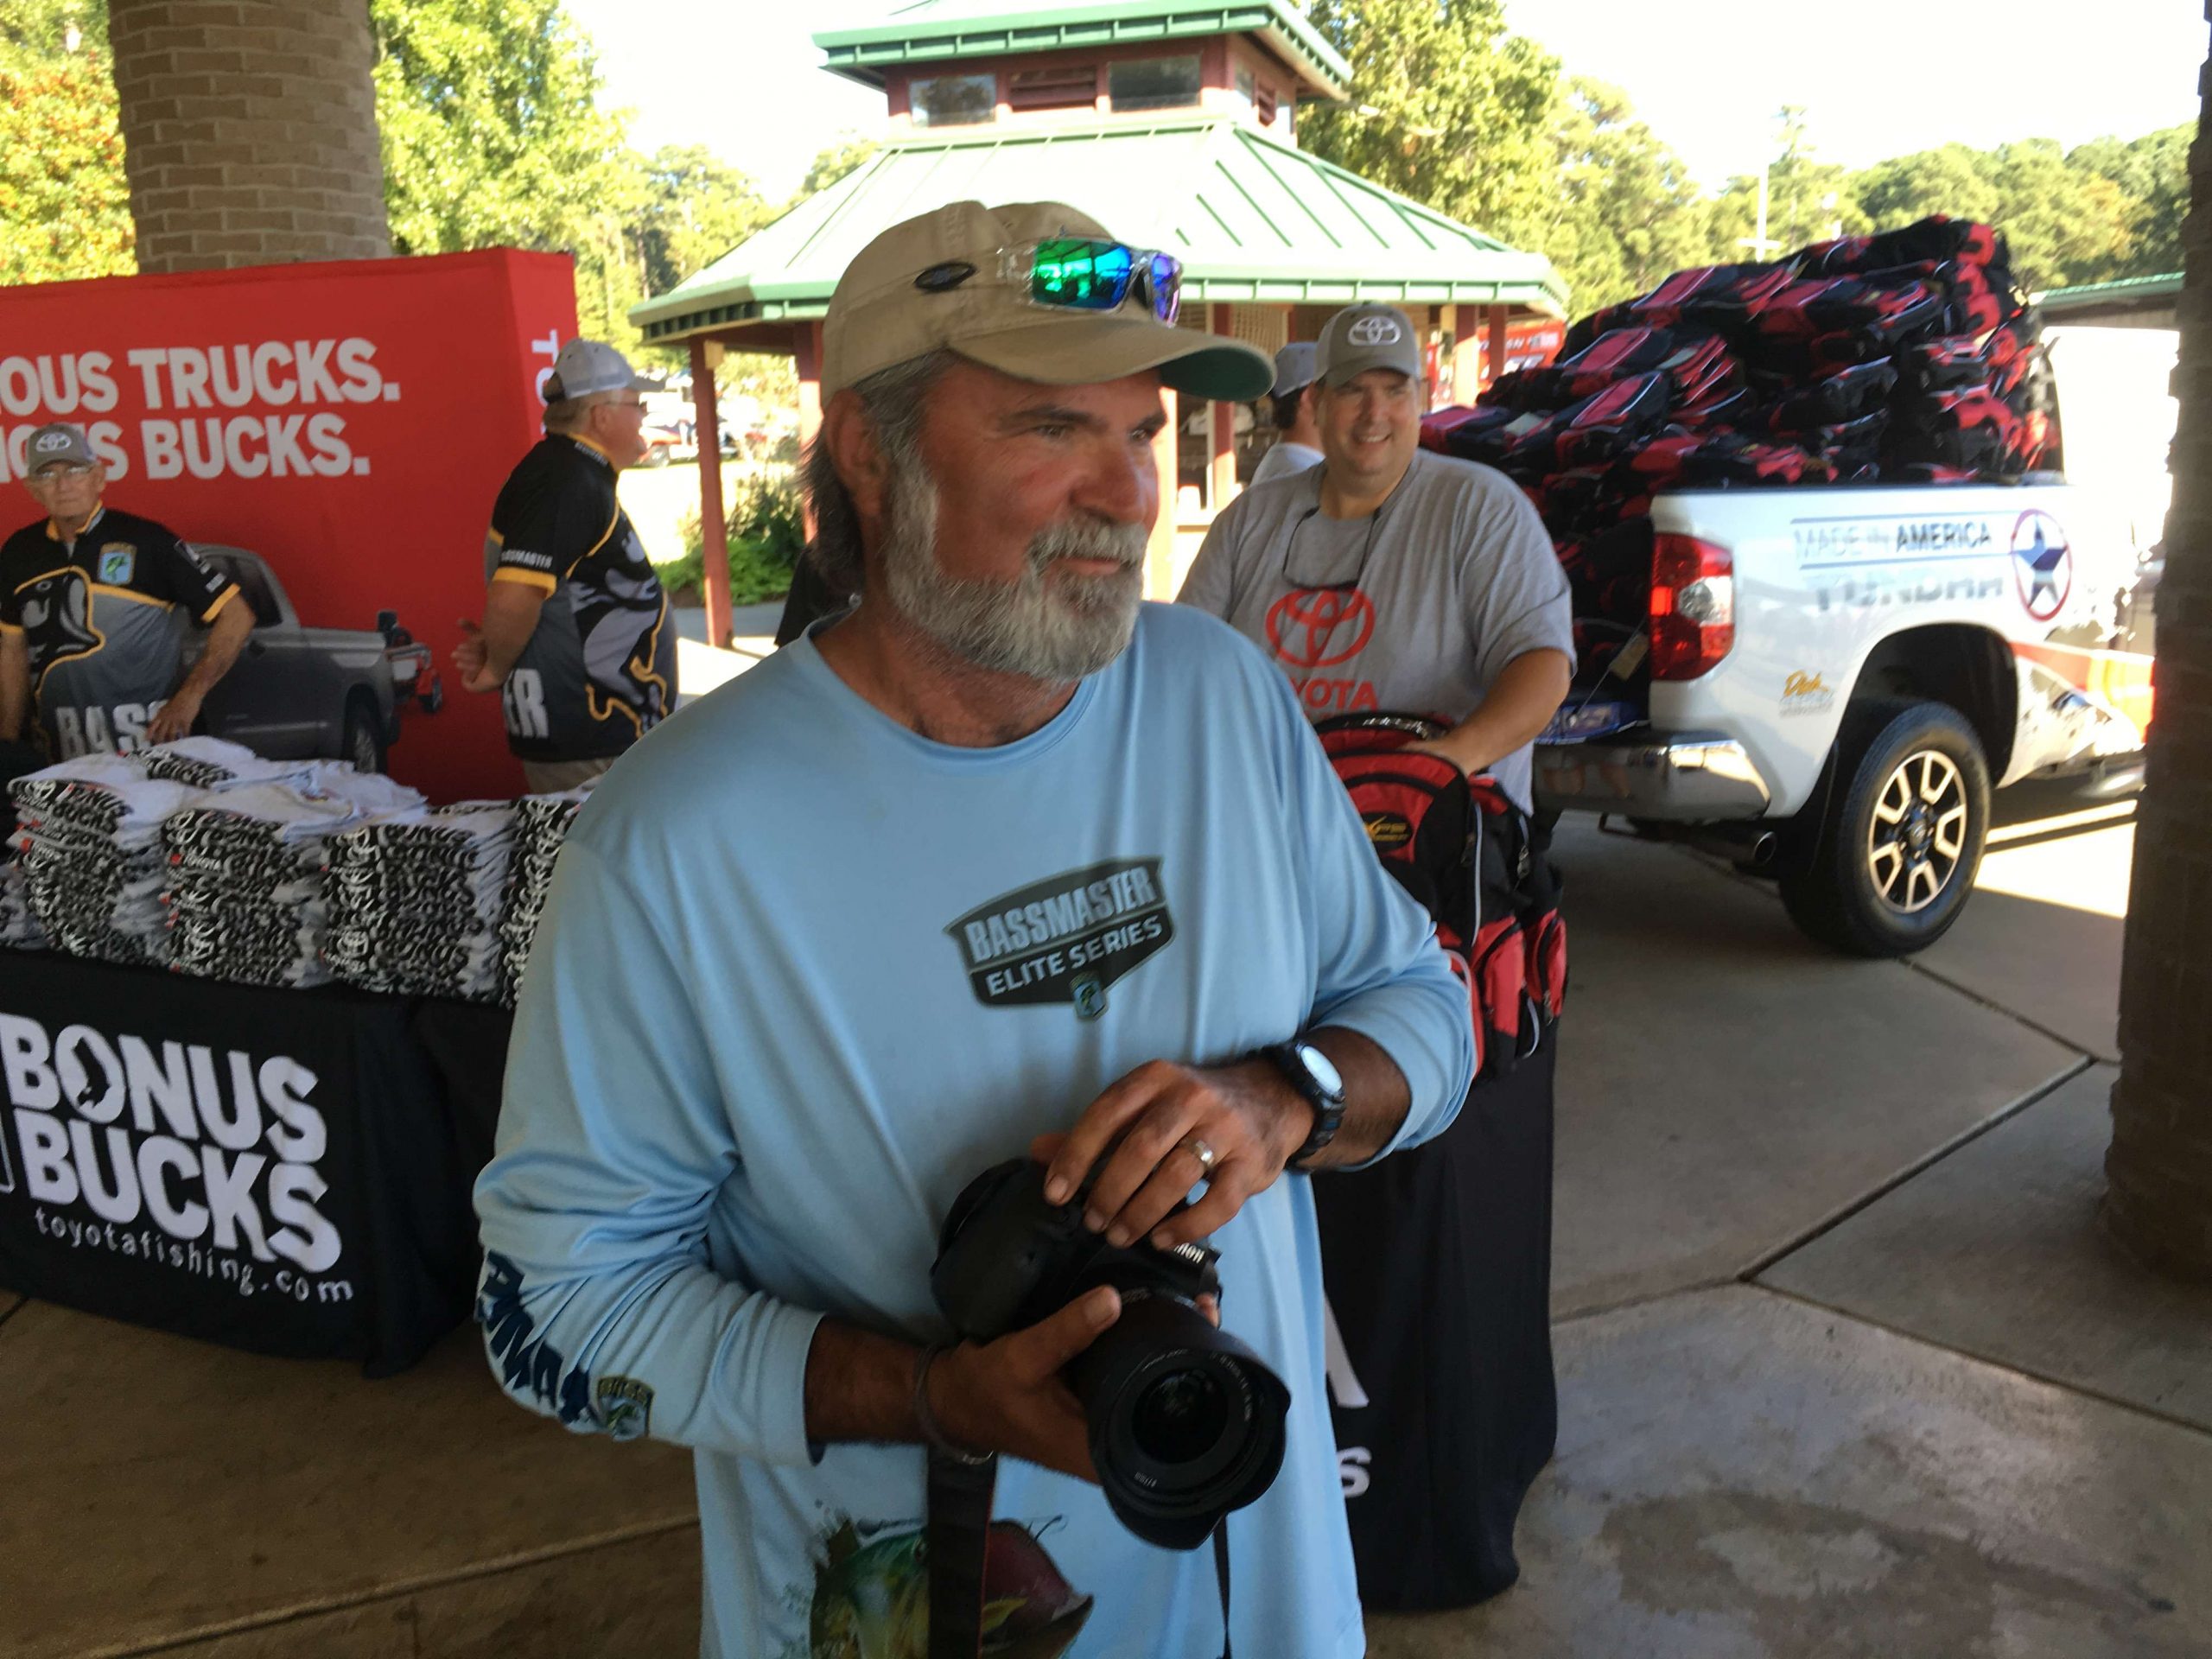 The man, the myth, the legend, James Overstreet was there to take pictures of registration, and to fish the event with Steve Bowman. These guys are not only pros at showing the world bass fishing through their photos and content, they are pretty good sticks!